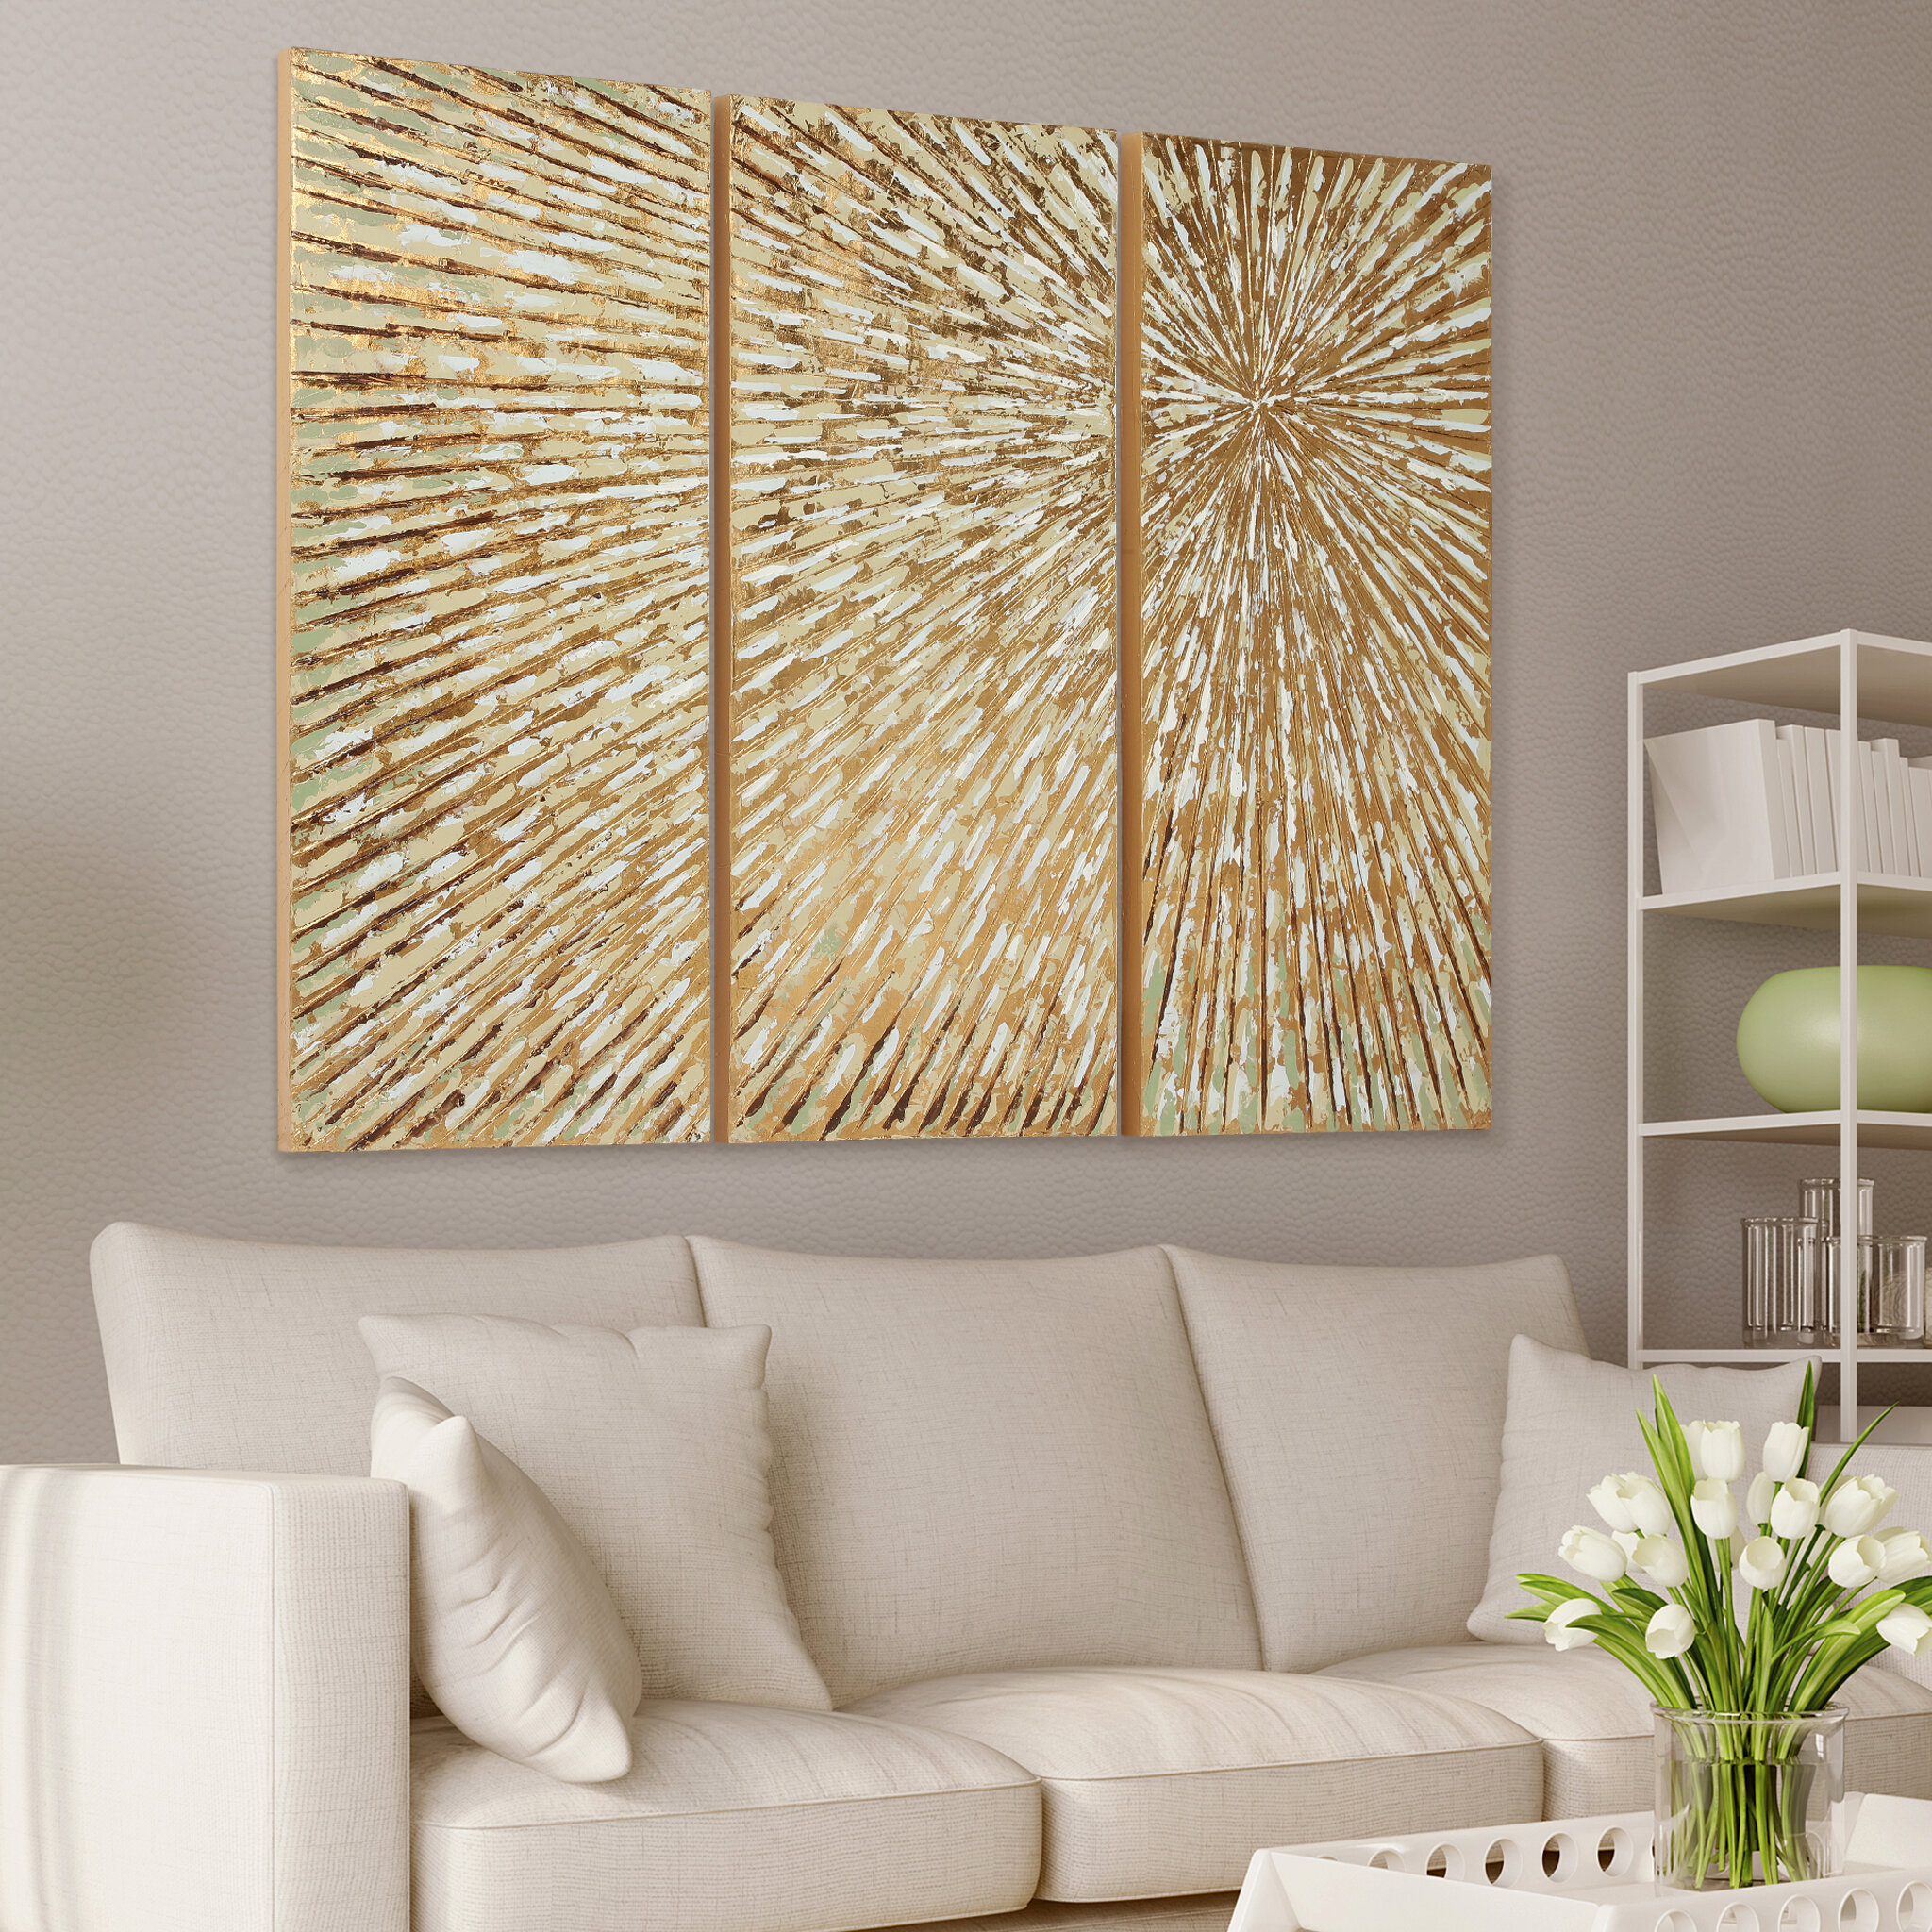 Everly Quinn Sunshine On Canvas Pieces Painting  Reviews Wayfair